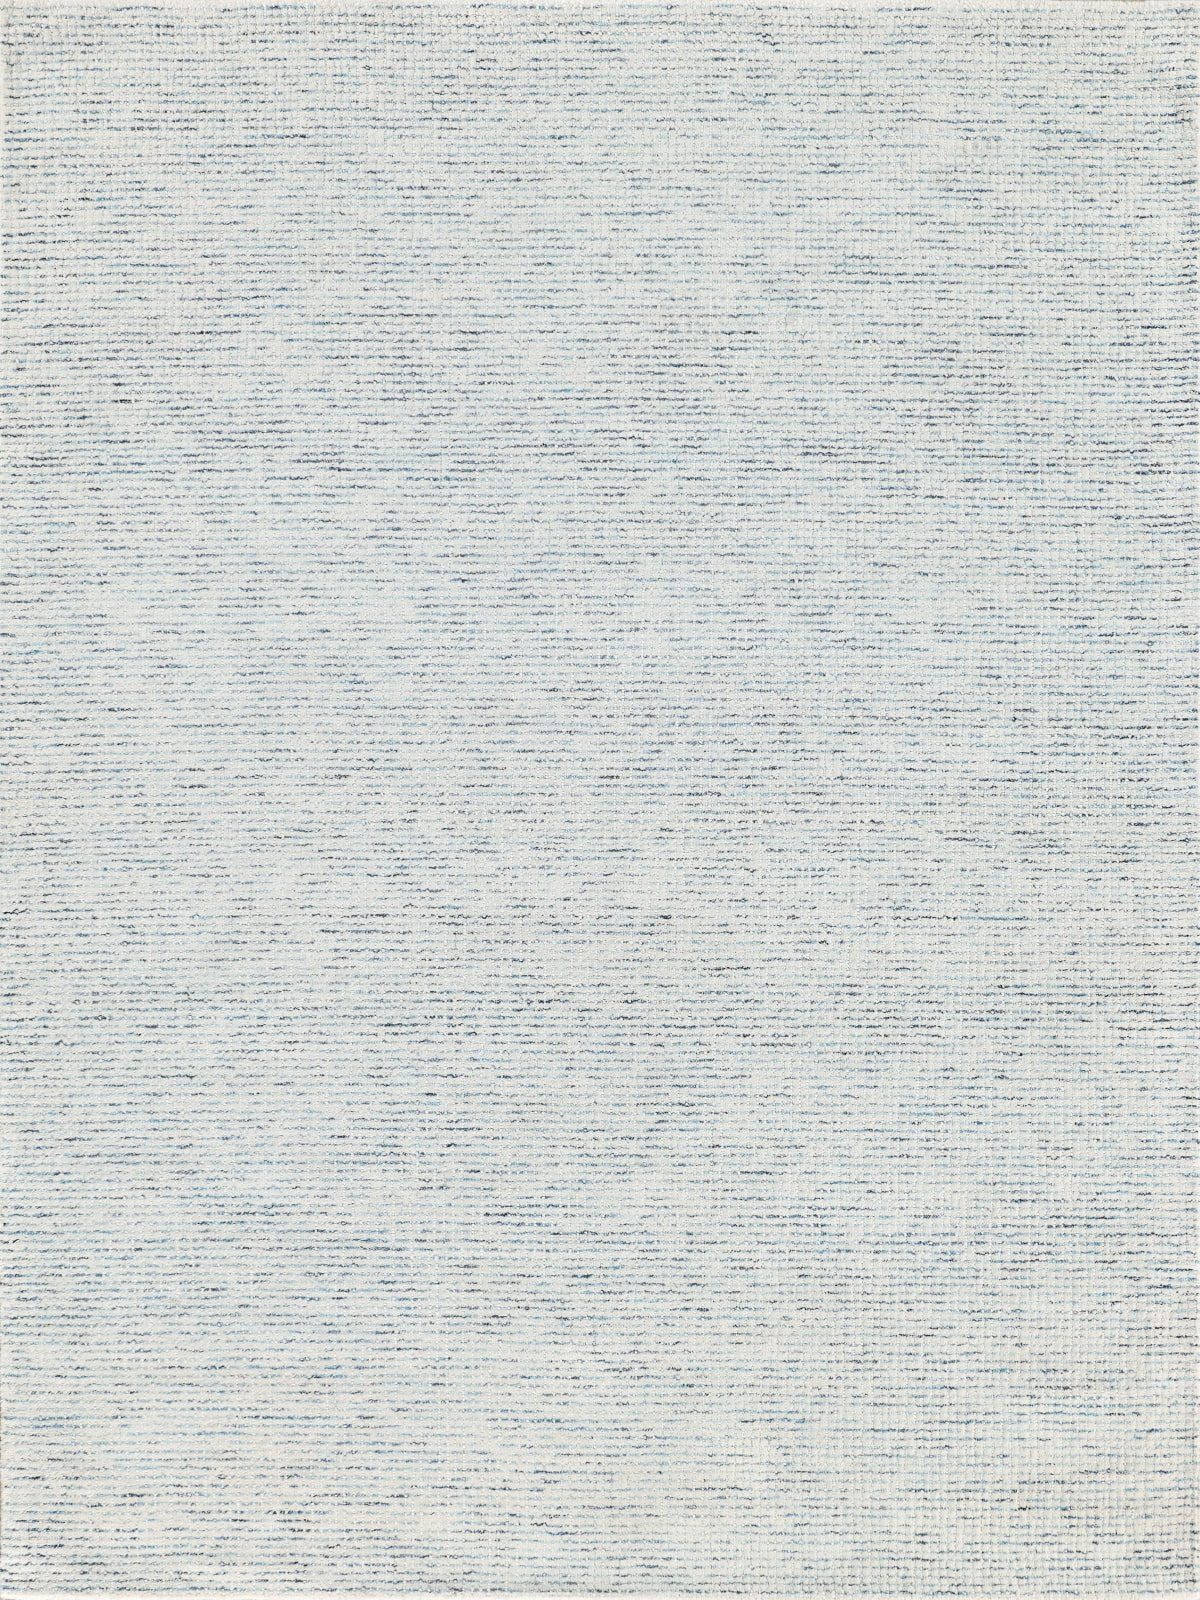 Exquisite Rugs Key West 6026 Ivory/Blue Area Rug